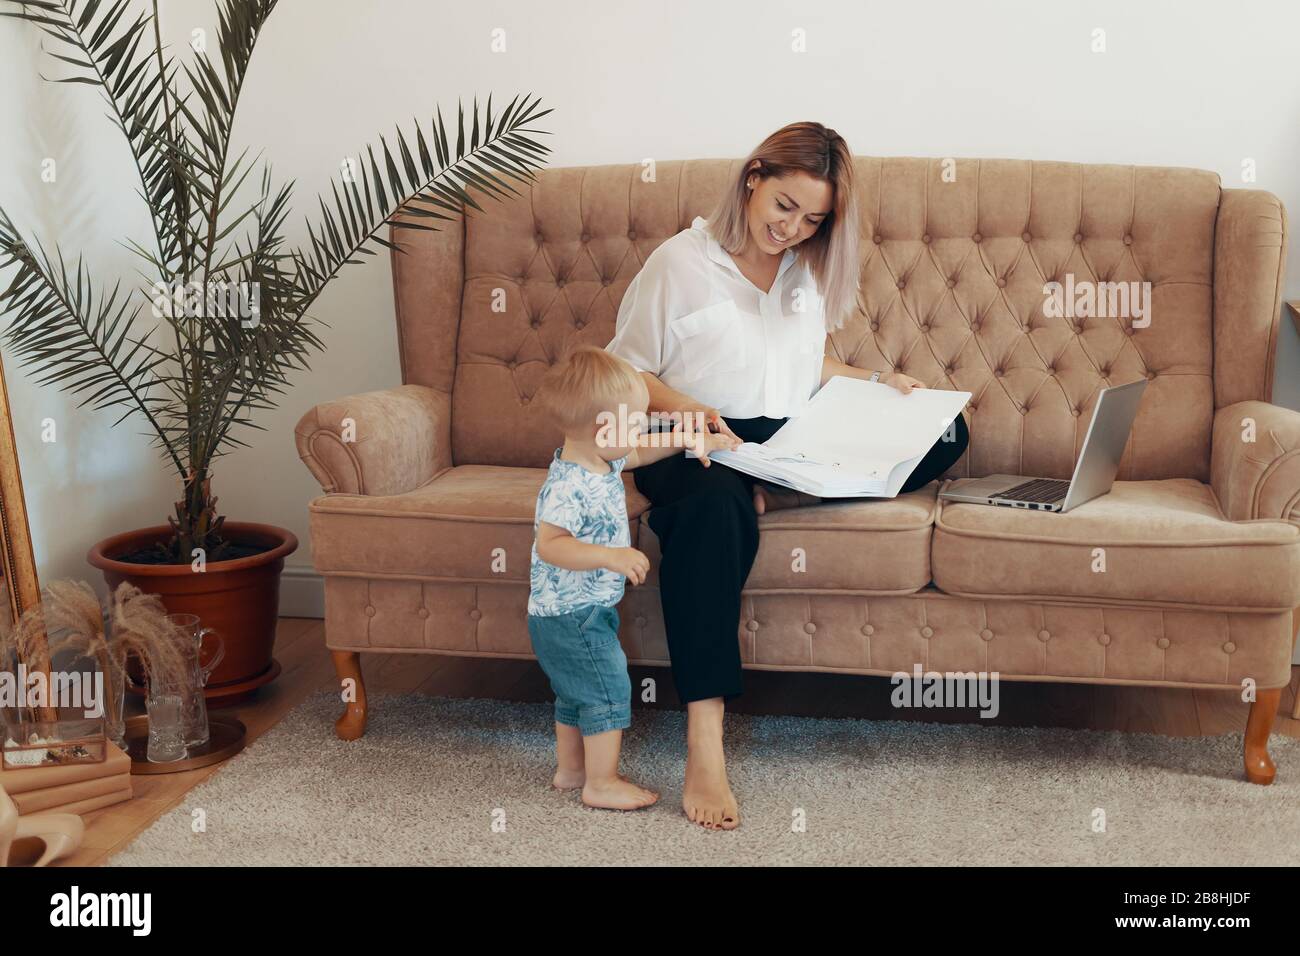 Beautiful business woman working at home. Multi-tasking, freelance and motherhood concept. Working mother career Stock Photo